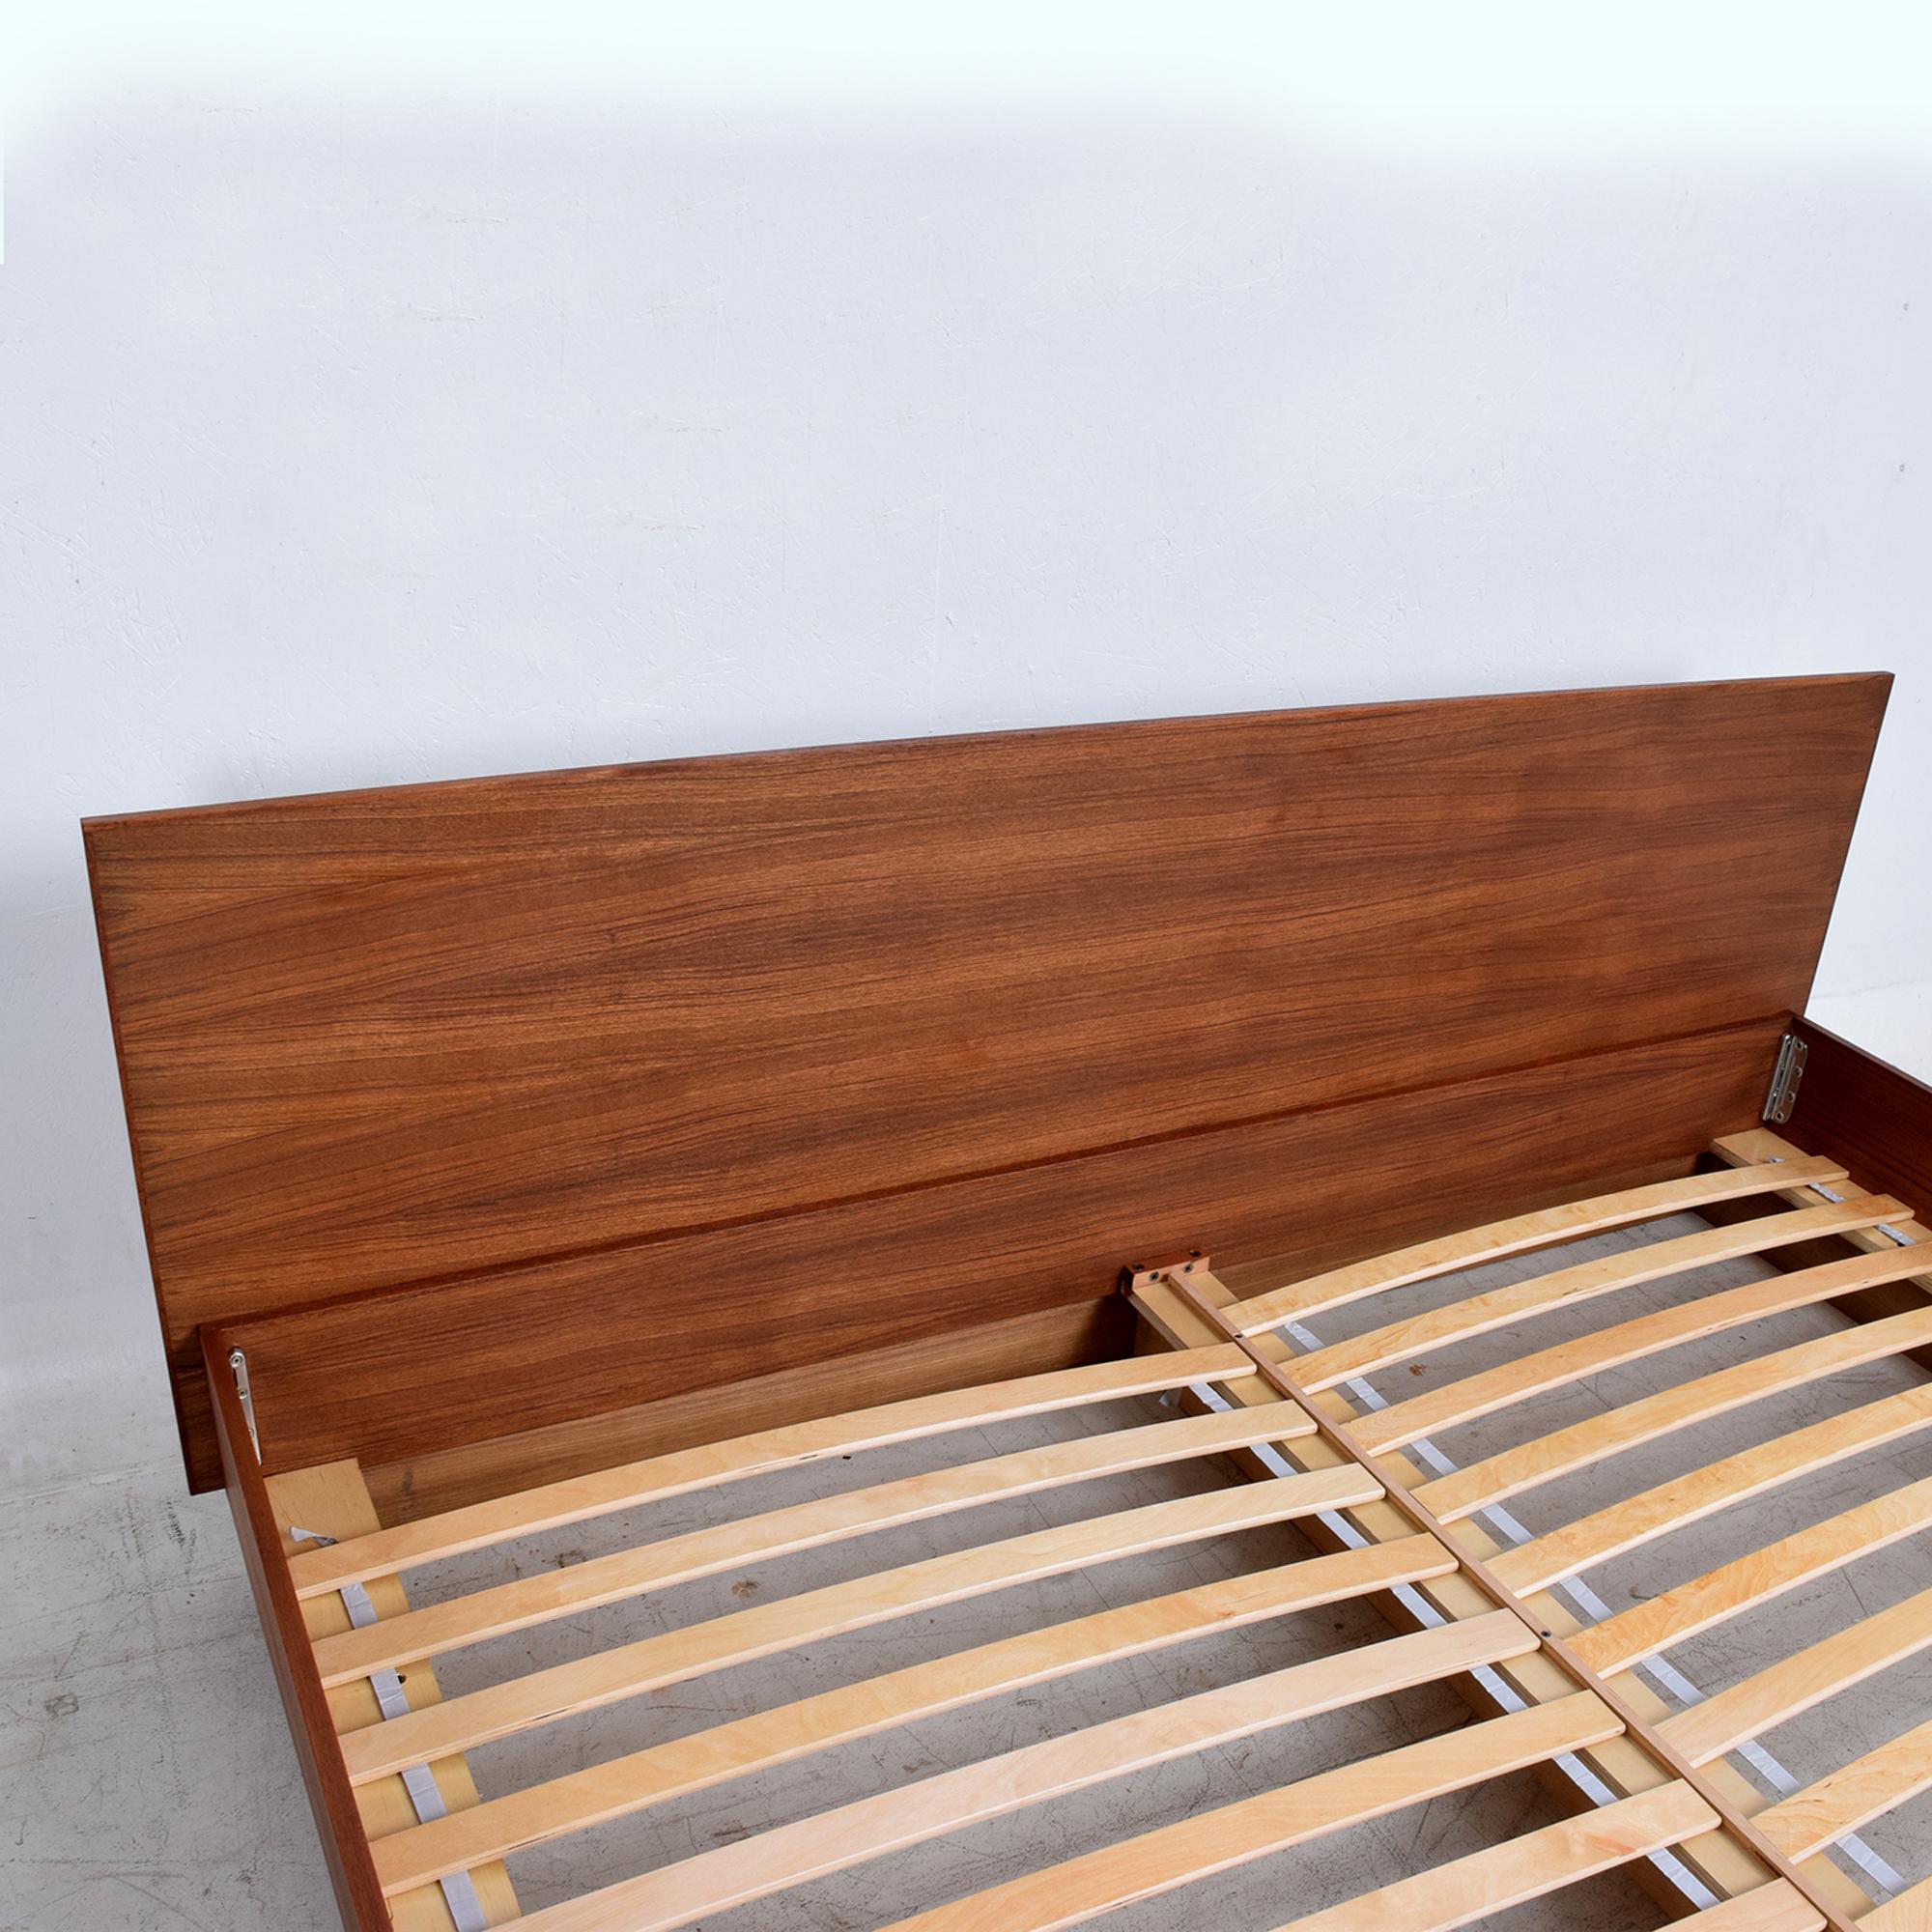 Queen Bed
Modern QUEEN Bed Walnut Wood Frame designed by Pablo Romo for AMBIANIC
Midcentury inspired.
Made in California
Constructed in Veneer and Walnut Wood
30H x 63W x 80 D
Bed is new, custom made. Please allow 8-10 weeks for production.
Original